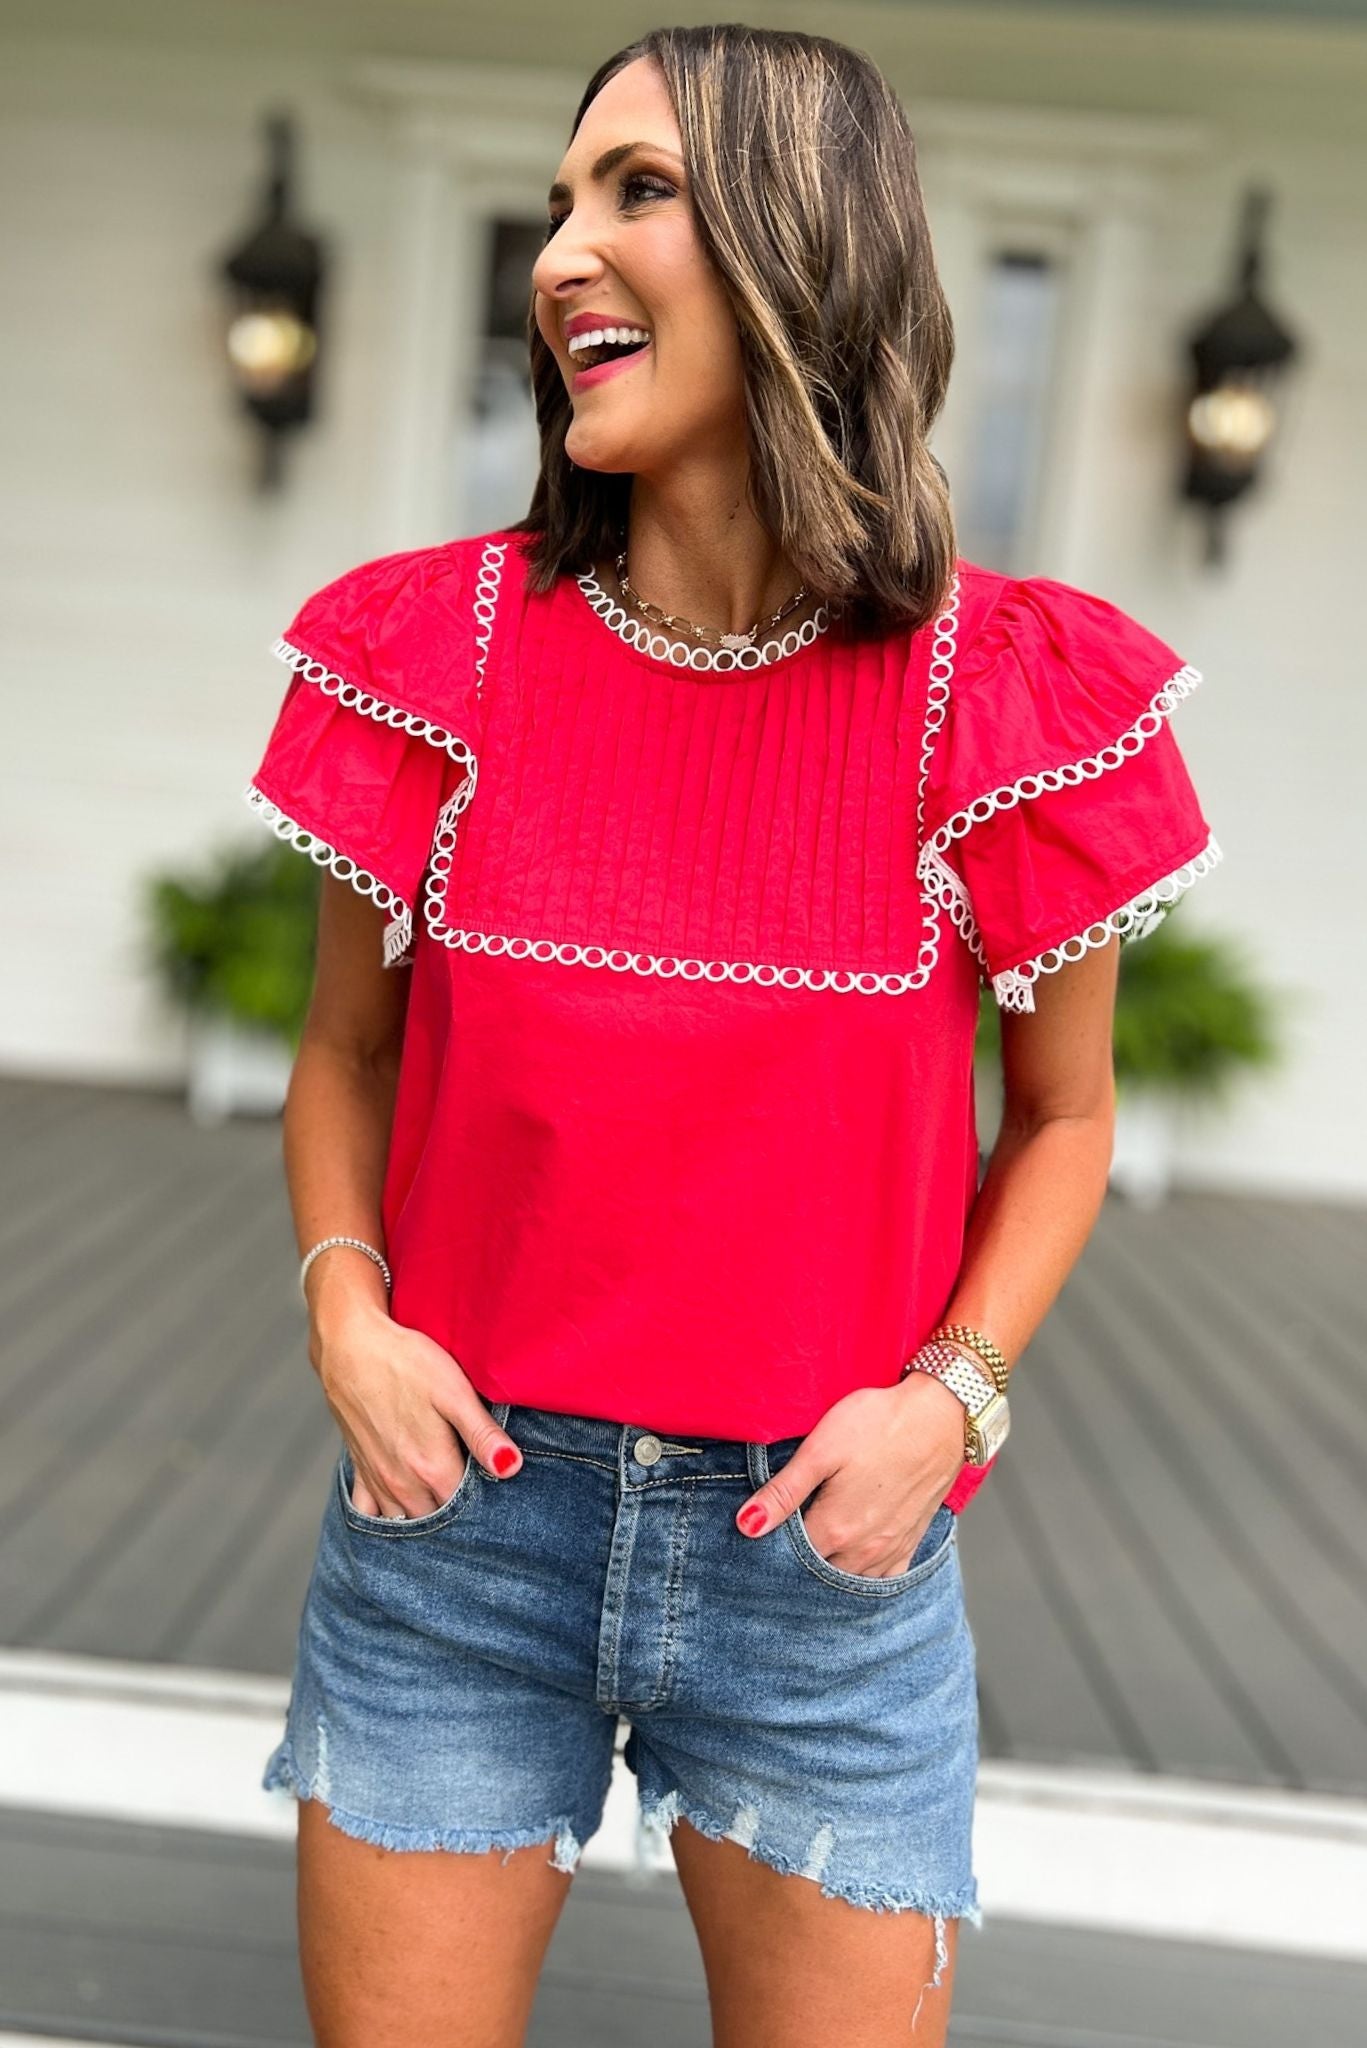  SSYS The Lyla Lace Trim Top In Red, ssys top, ssys the label, elevated top, must have top, Fourth of July collection, must have style, mom style, summer style, shop style your senses by MALLORY FITZSIMMONS, ssys by MALLORY FITZSIMMONS